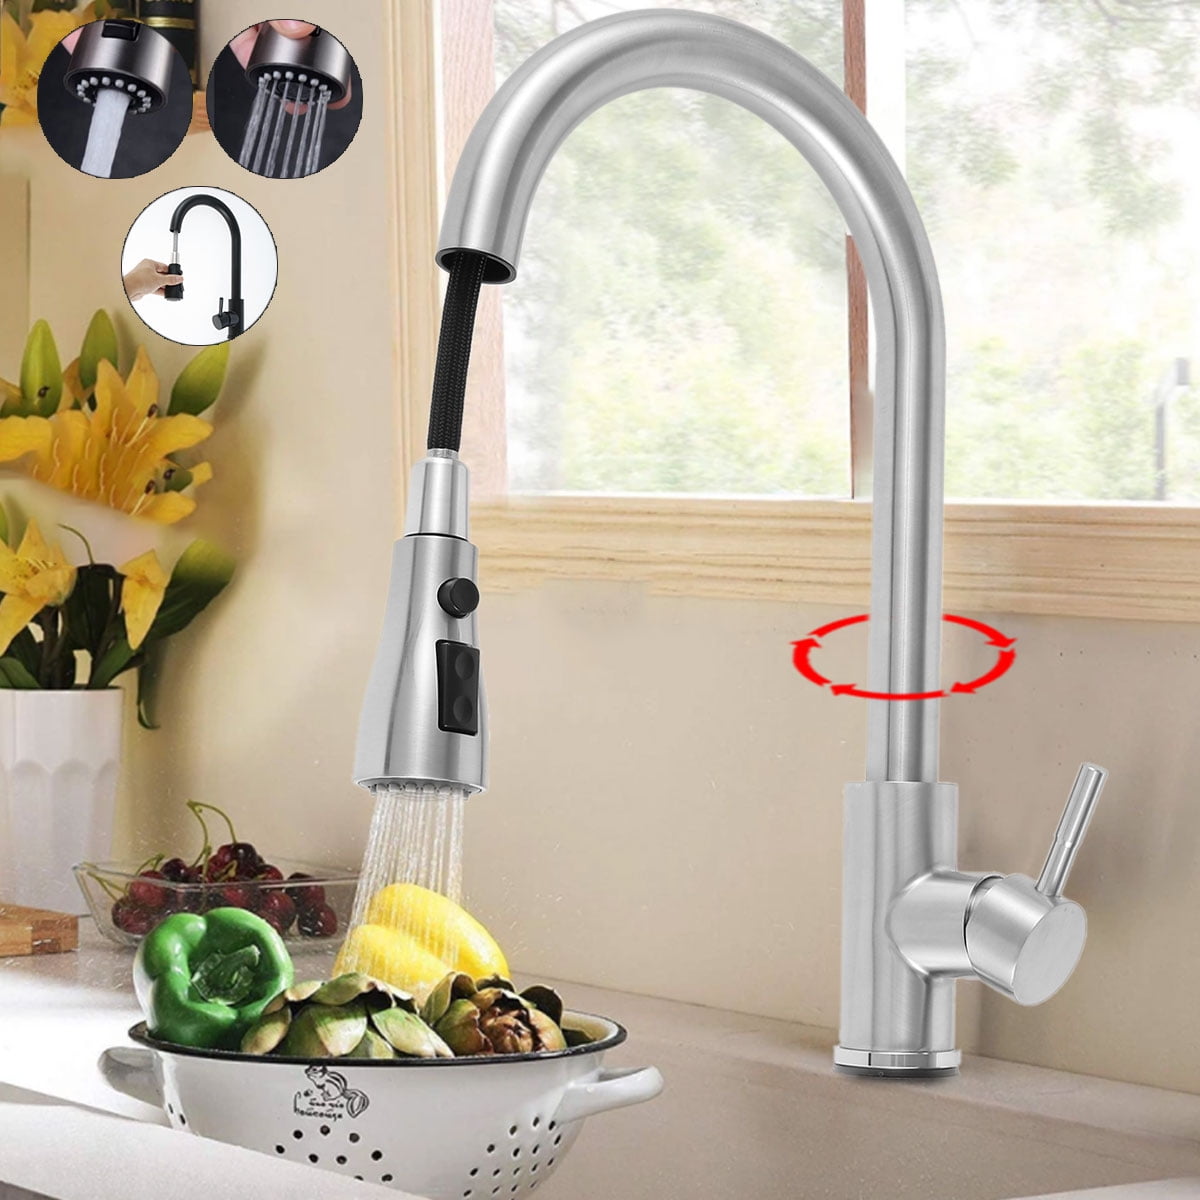 Brushed Nickel Touch Sensor Kitchen Sink Faucet With Pull Out Spray &Cover Plate 